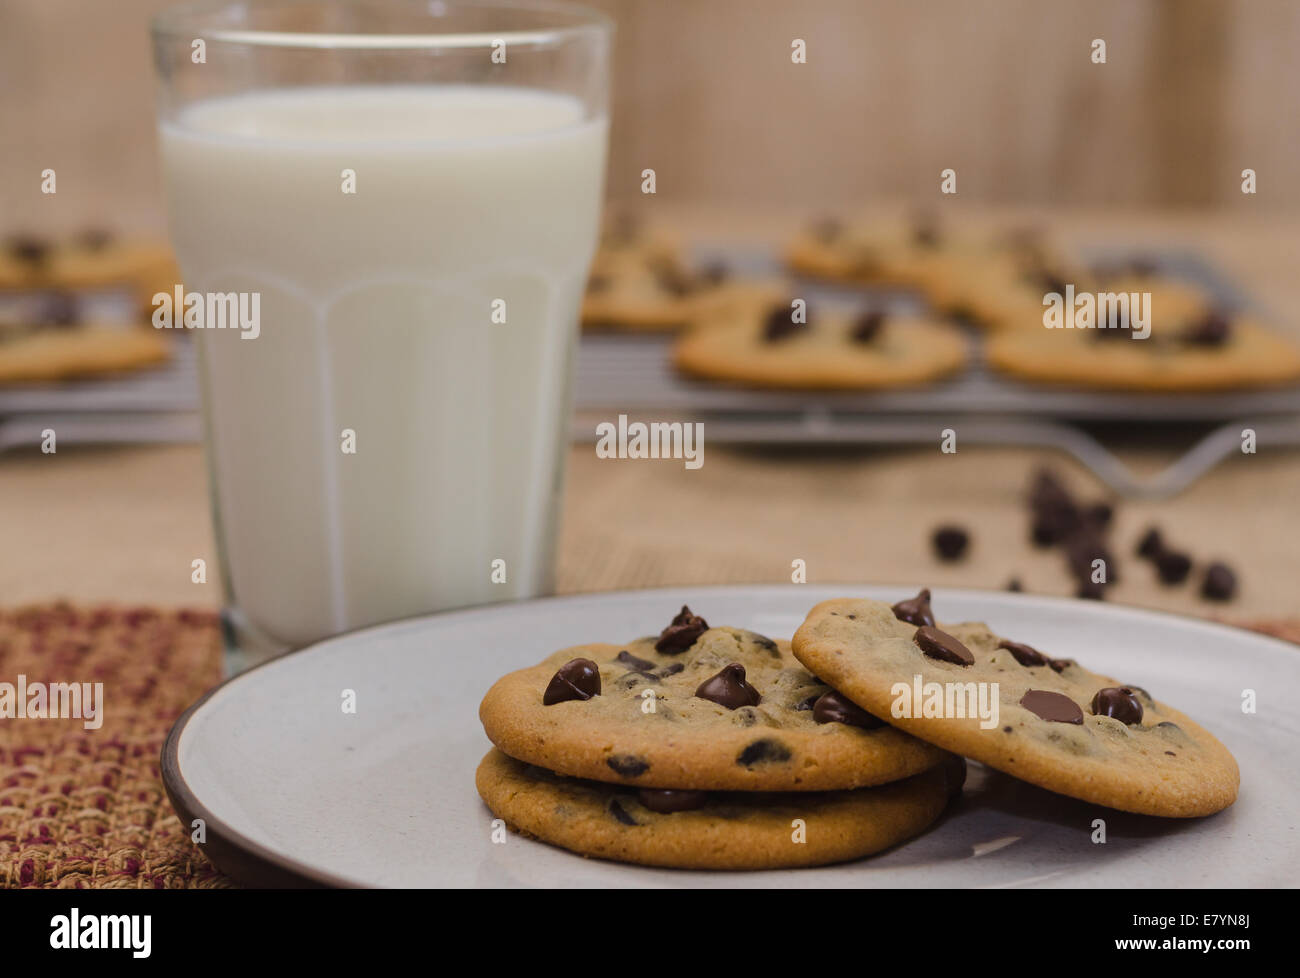 Chocolate chip cookies on plate with glass of milk, and rack of cooling cookies in the background Stock Photo